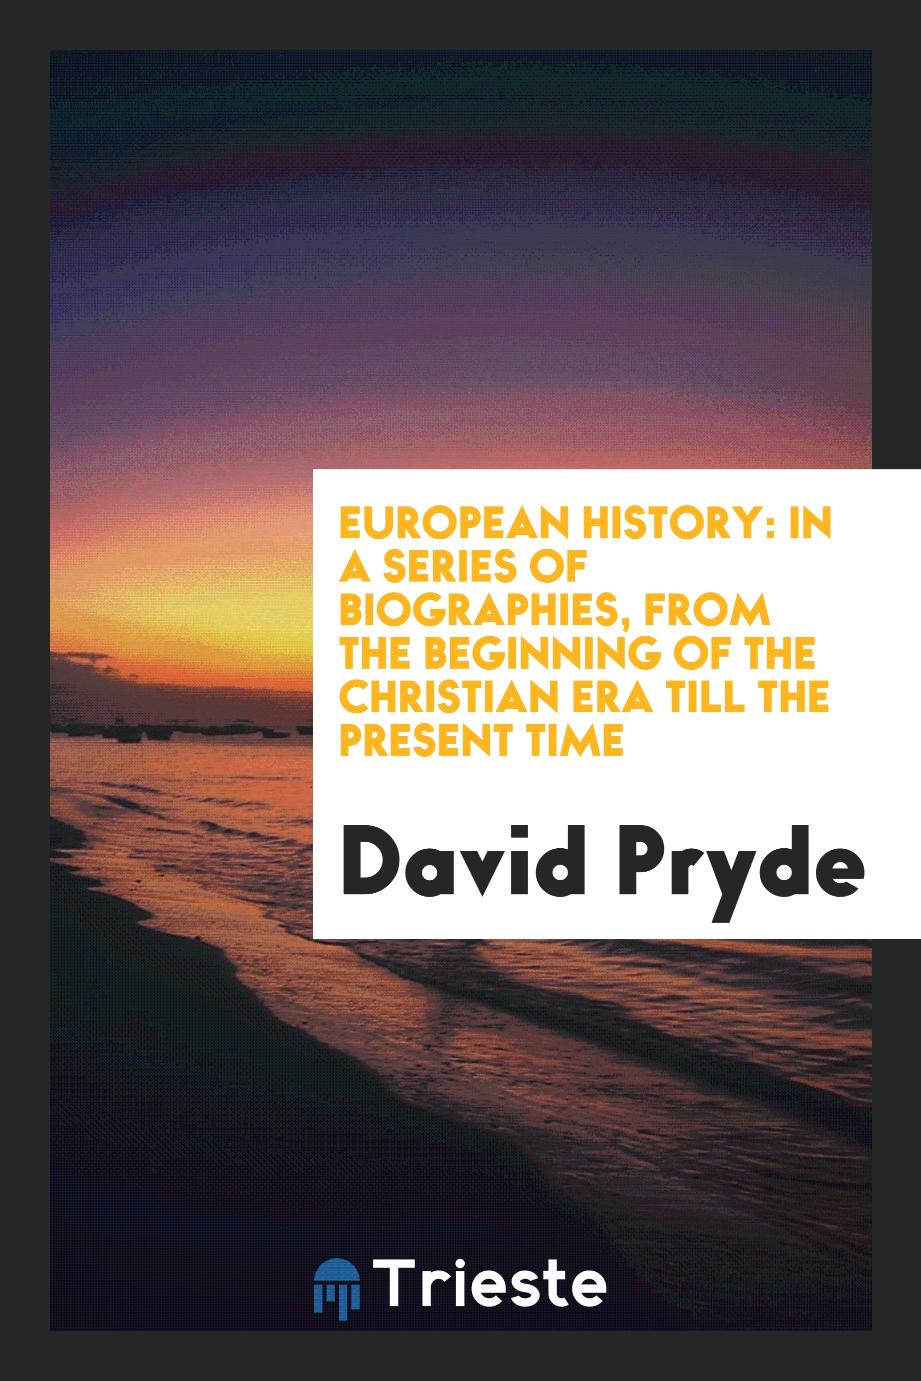 European History: In a Series of Biographies, from the Beginning of the Christian Era Till the Present Time